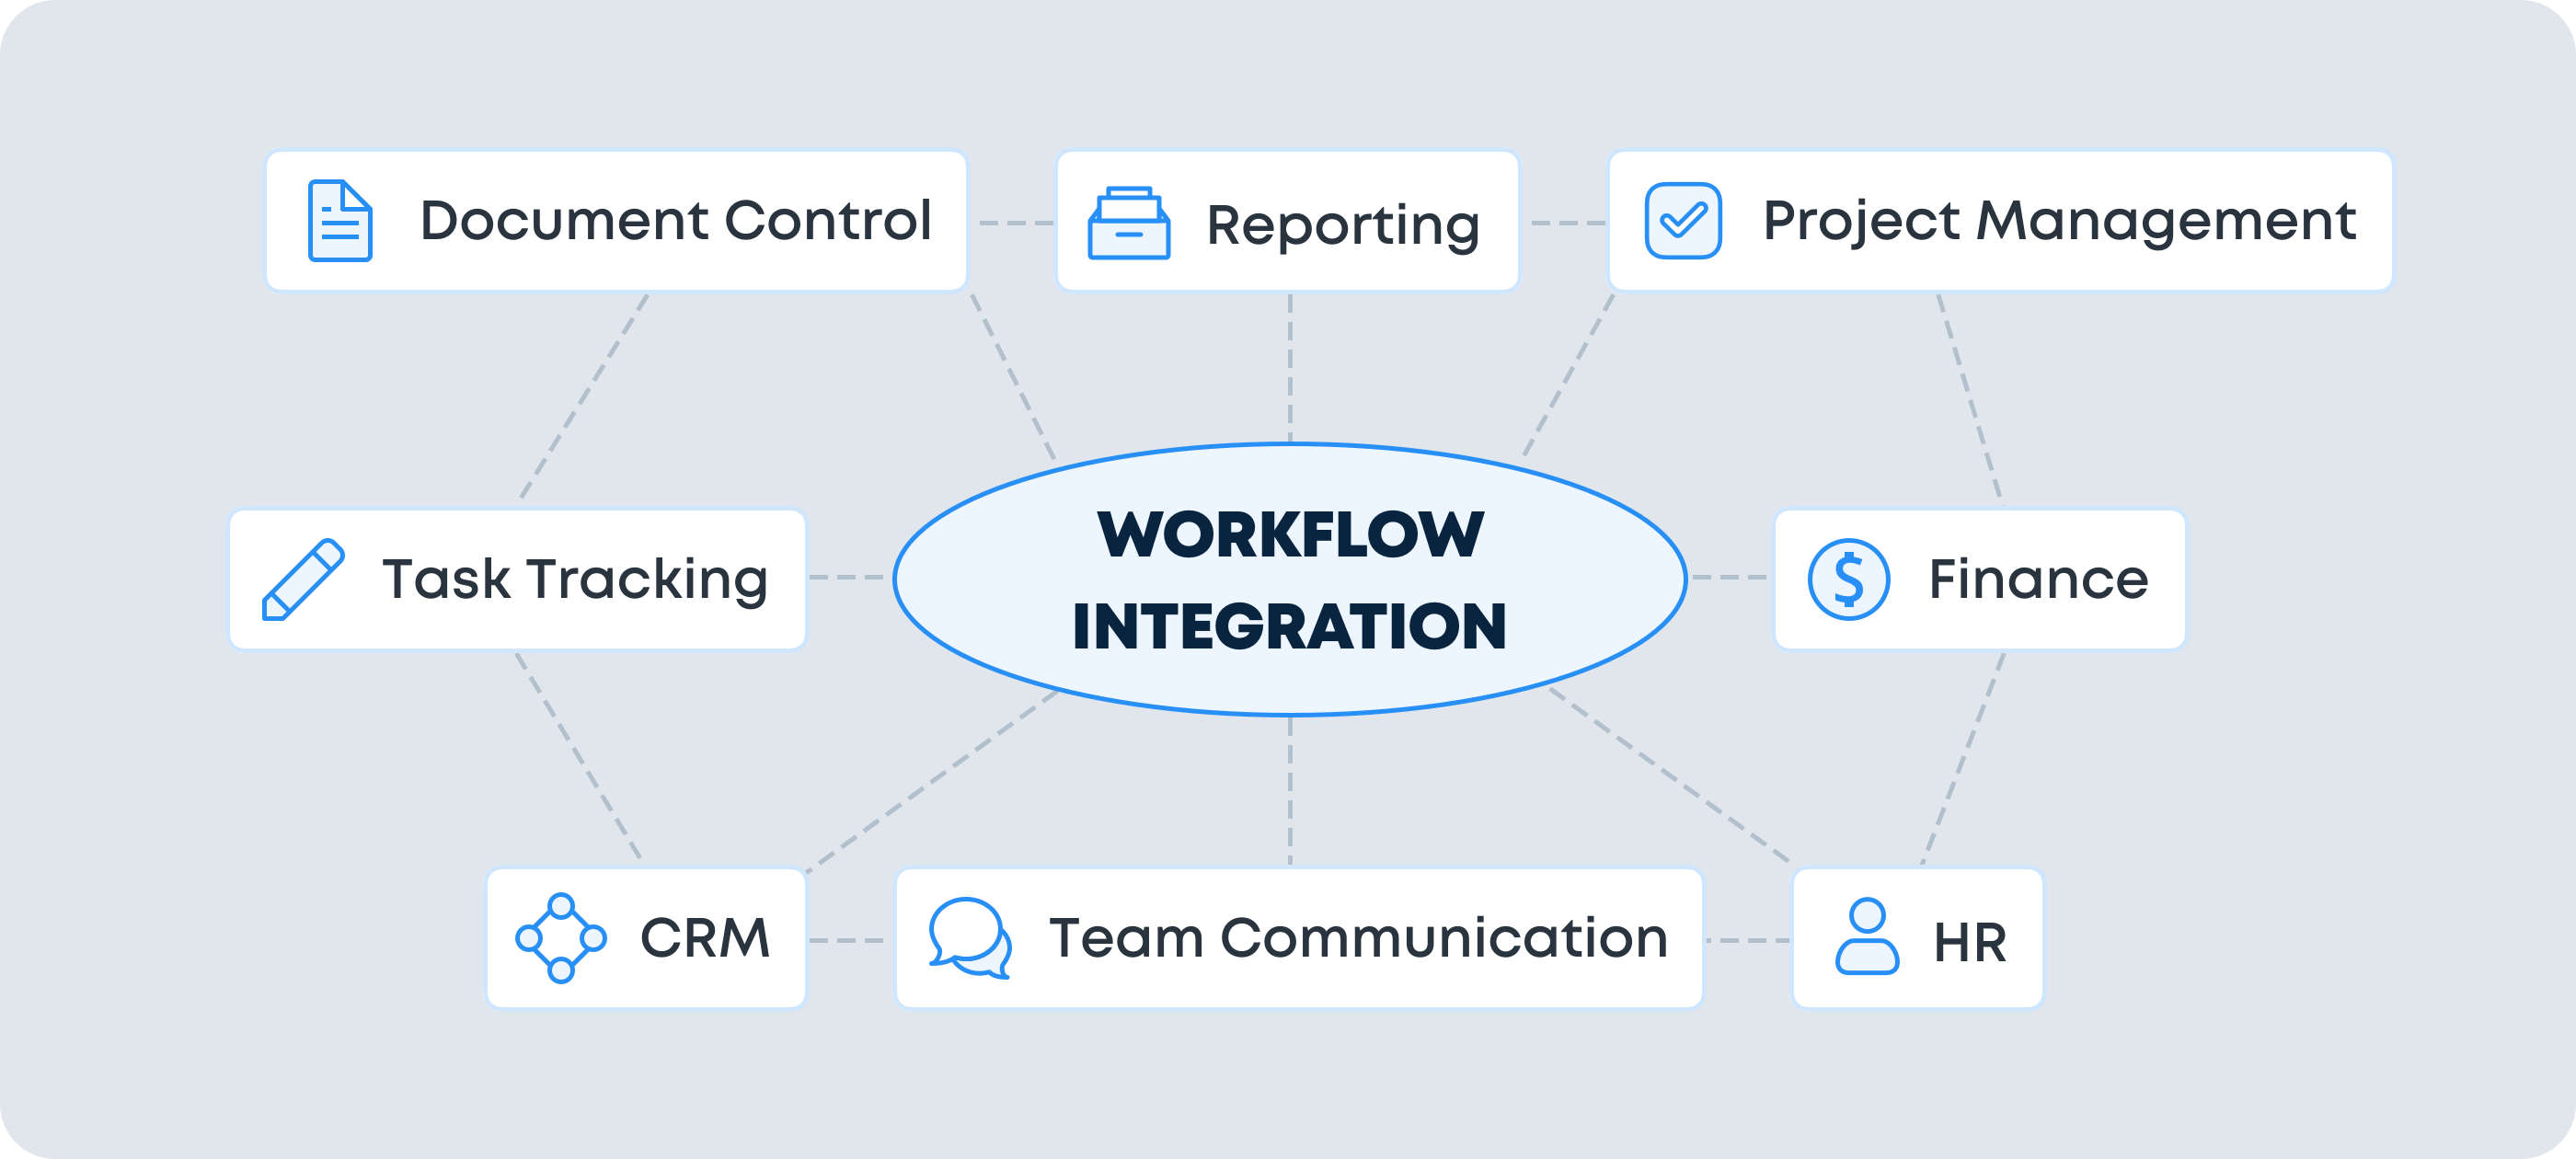 What workflow integration looks like